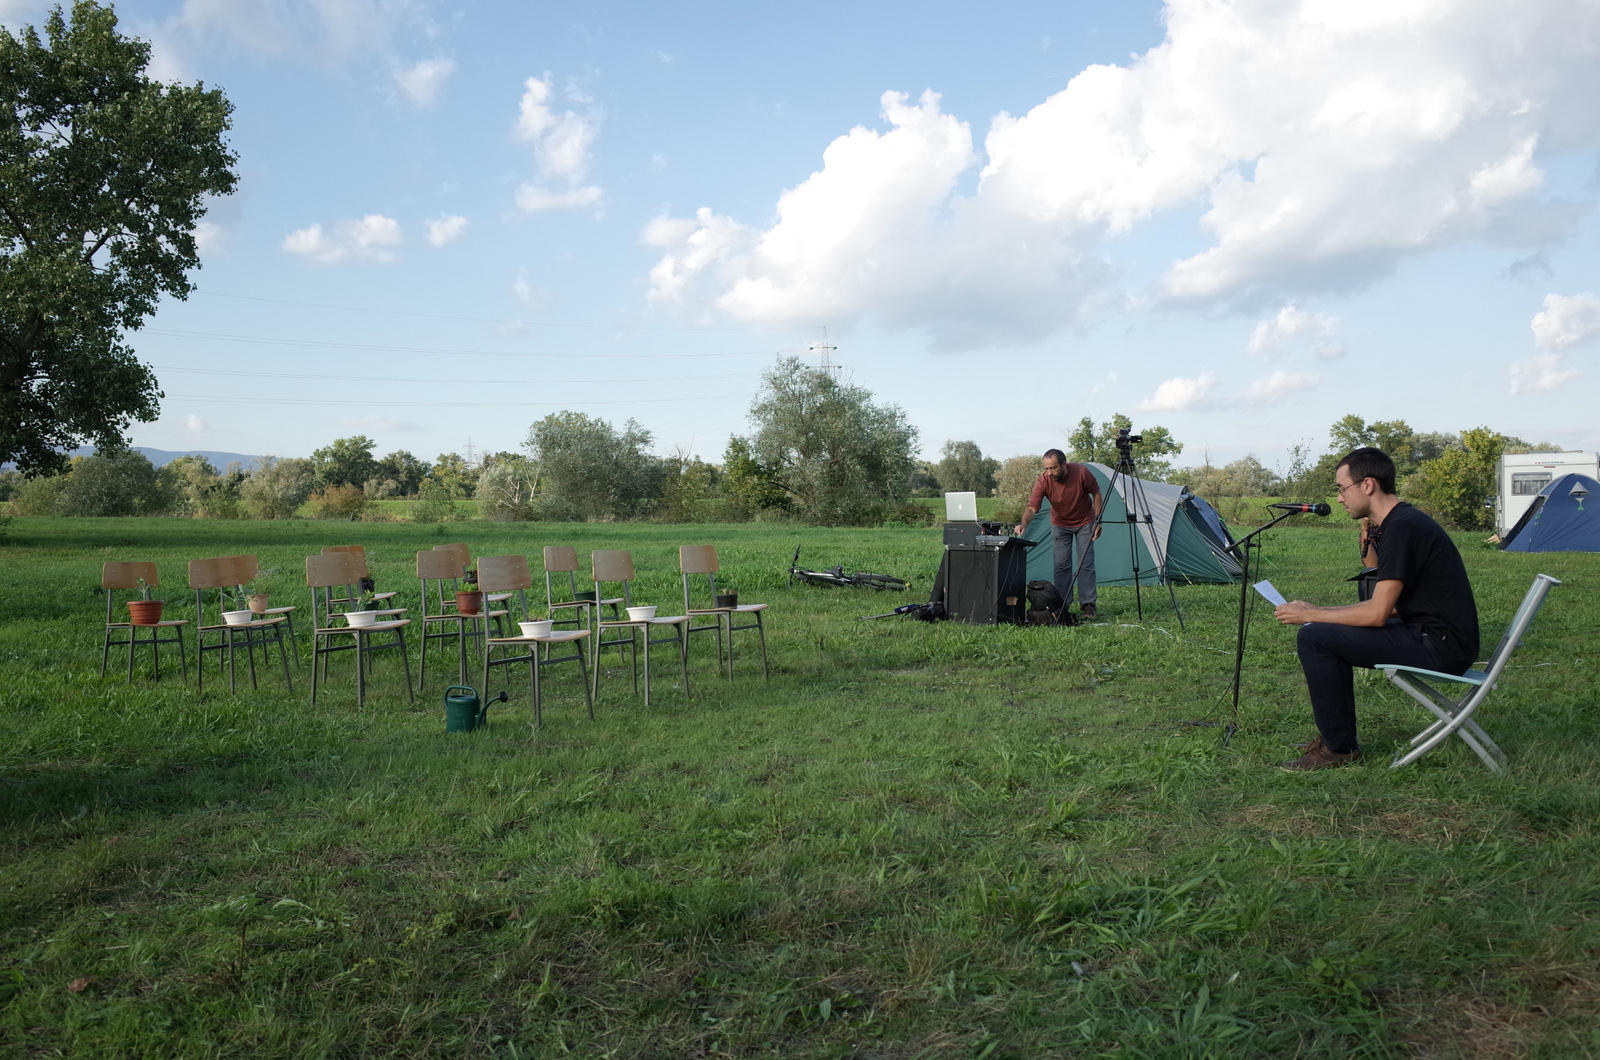 a man sits in a chair outside in a field near chairs